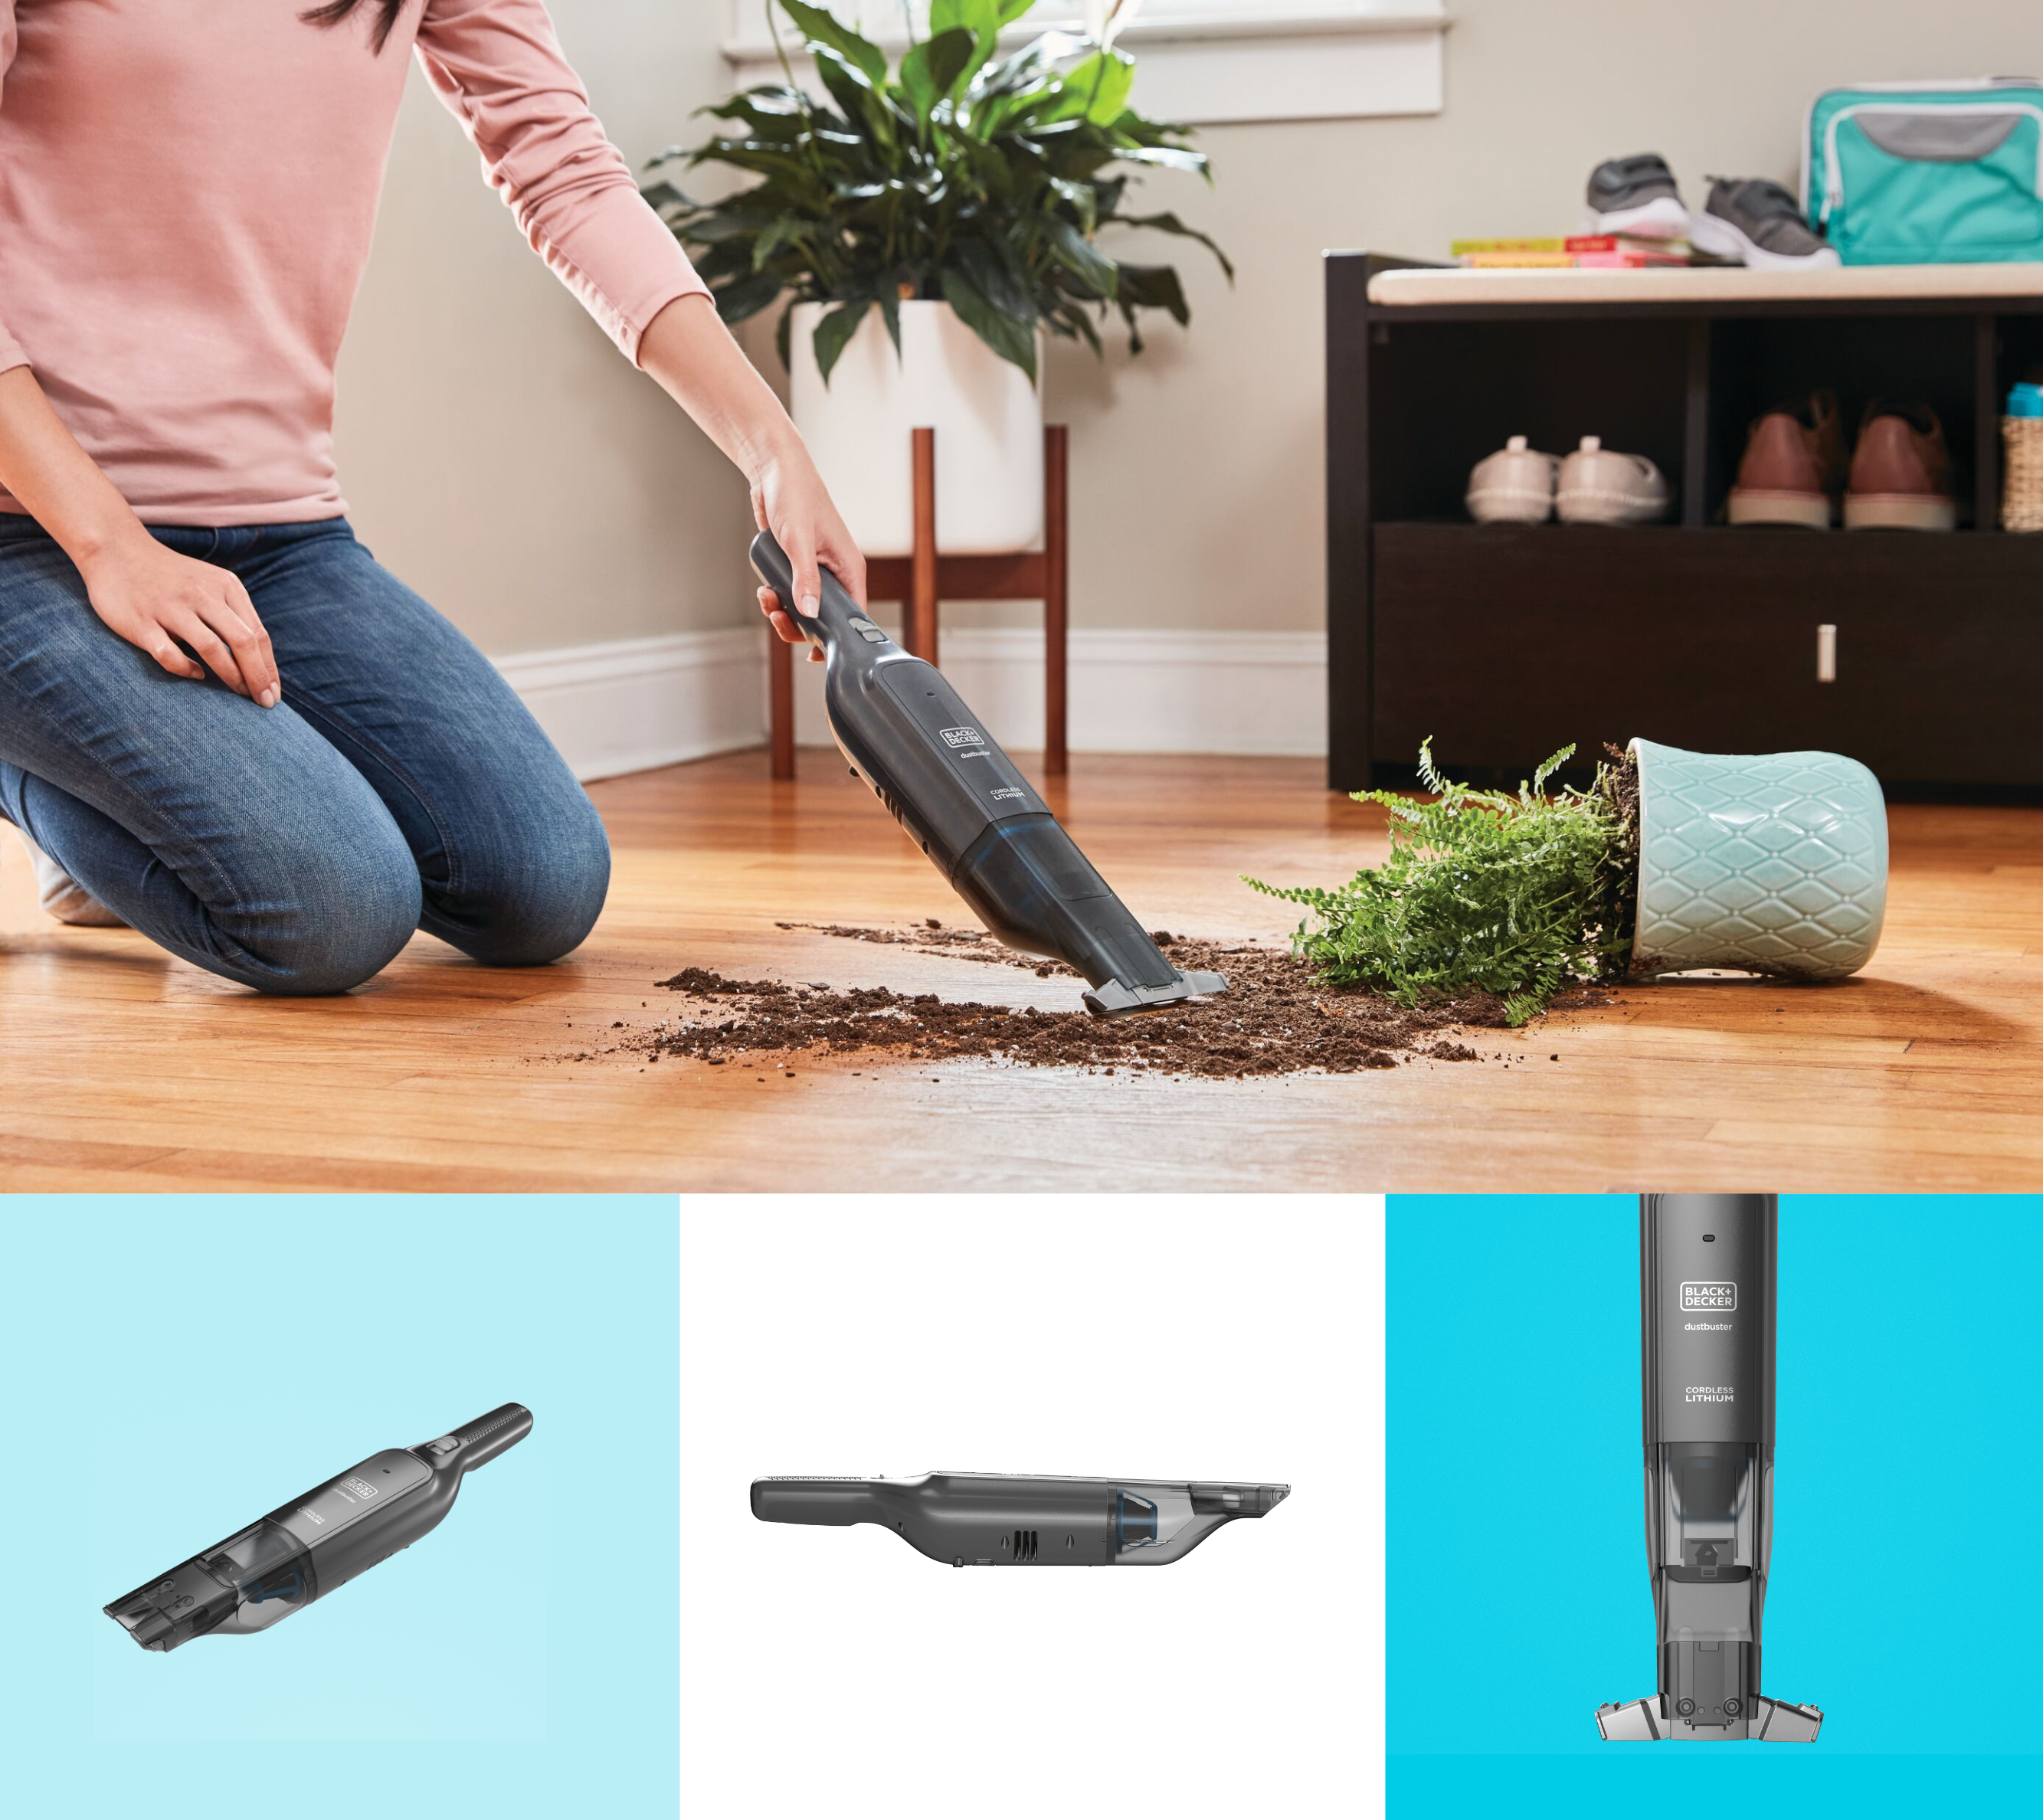 Woman cleaning up a spill with a dustbuster.